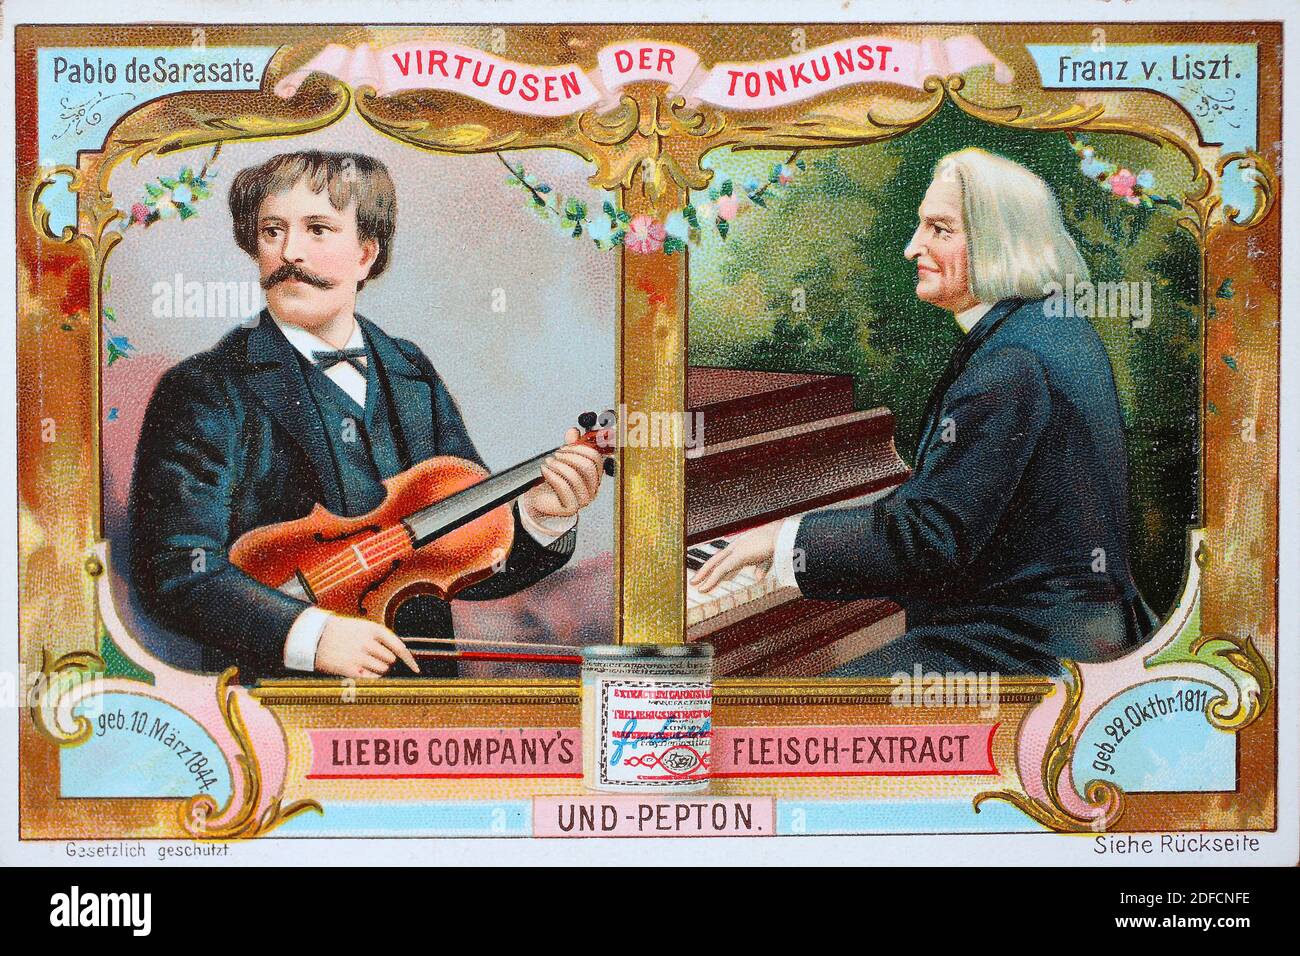 Picture series Virtuosos of the Art of Sound, Pablo de Sarasate and Franz Liszt  /  Bildserie Virtuosen der Tonkunst, Pablo de Sarasate und Franz Liszt, Liebigbild, digital improved reproduction of a collectible image from the Liebig company, estimated from 1900, pd  /  digital verbesserte Reproduktion eines Sammelbildes von ca 1900, gemeinfrei, Stock Photo